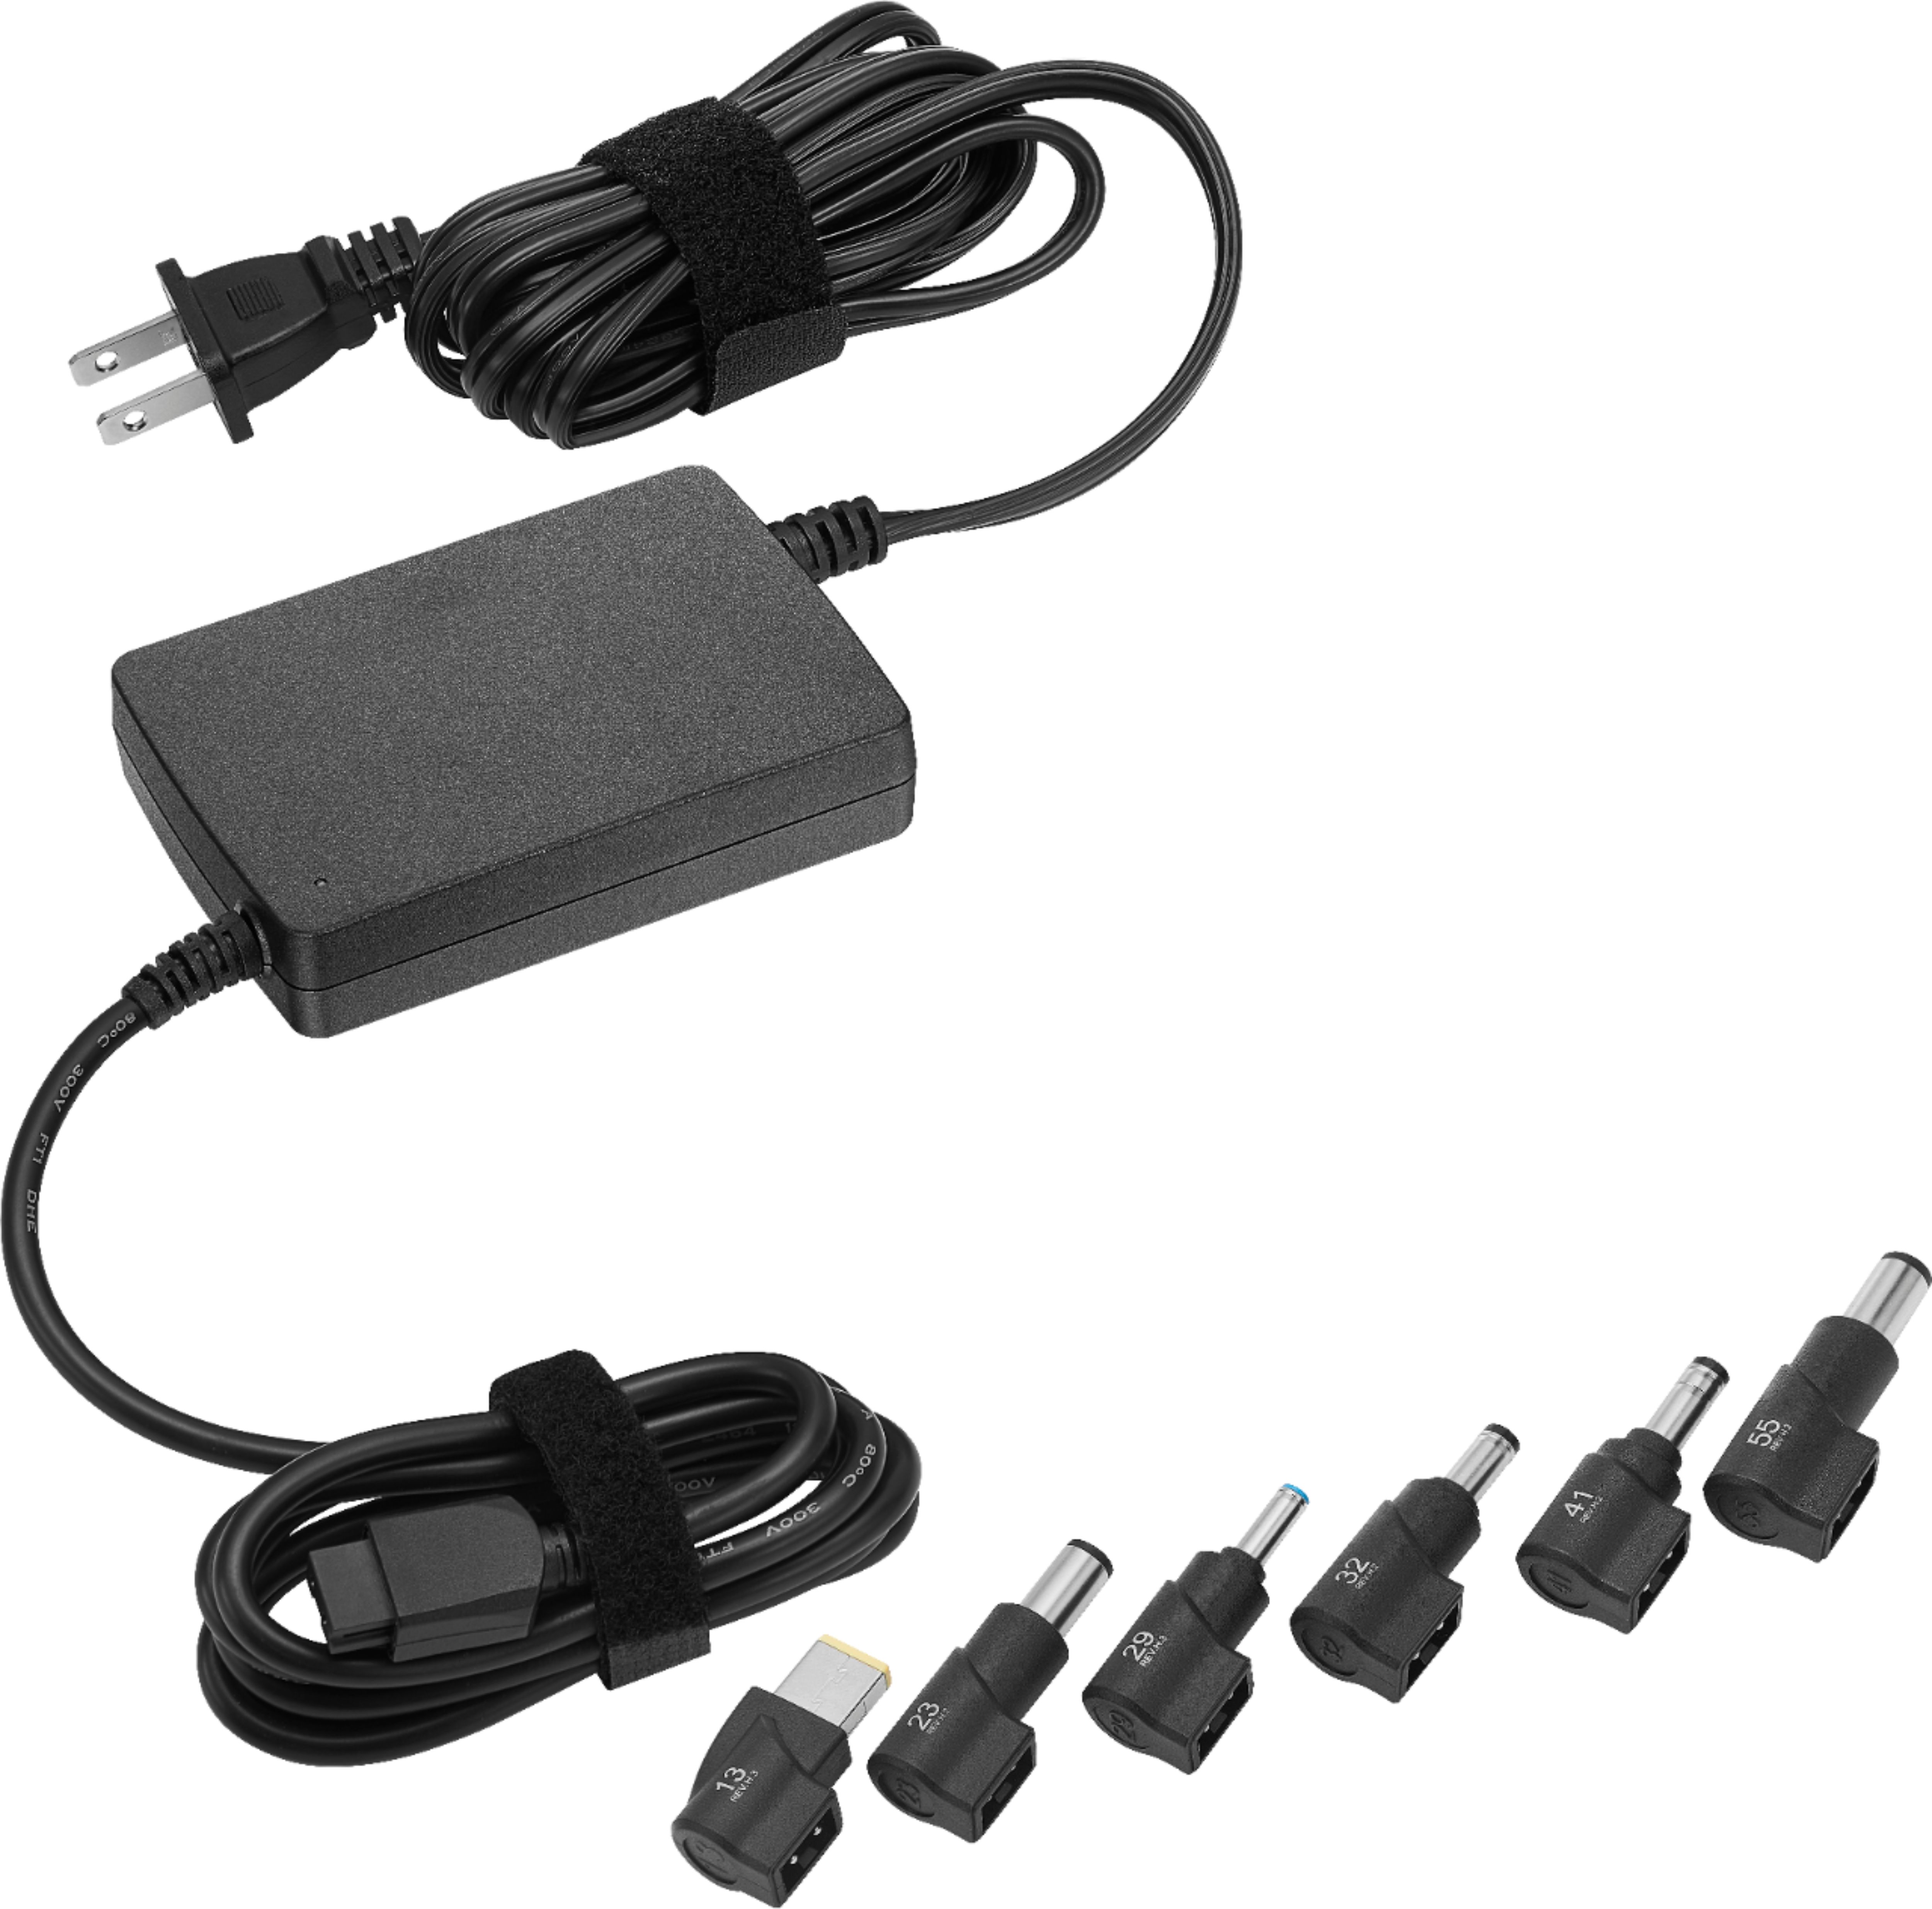 Insignia™ Universal 90W Laptop Charger Black NS-PWLC591 - Best Buy